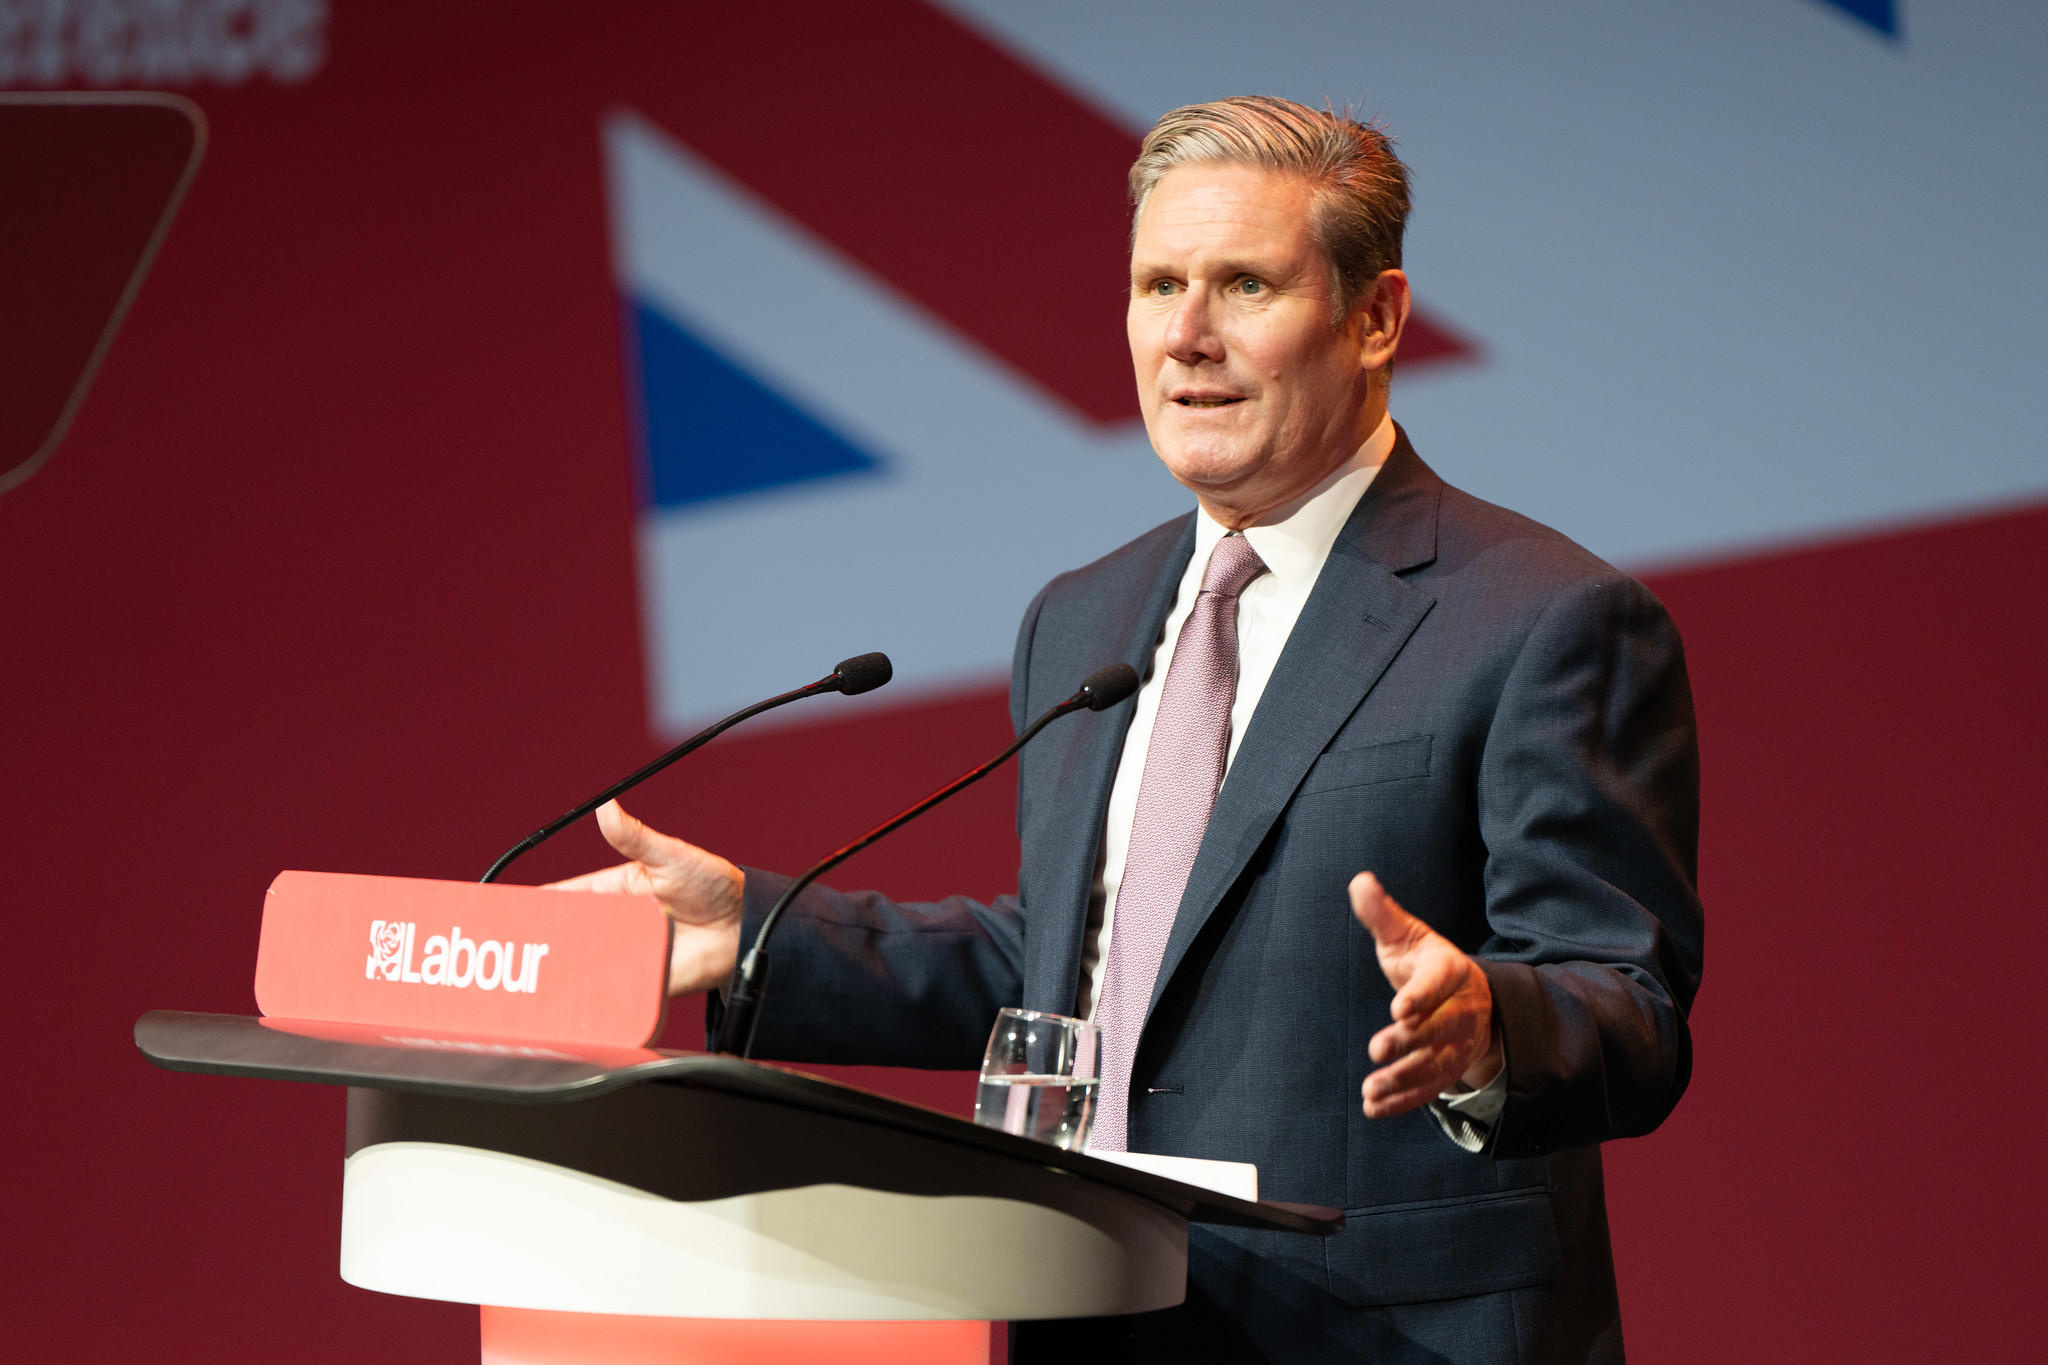 Sir Keir Starmer speaks to the Labour Conference